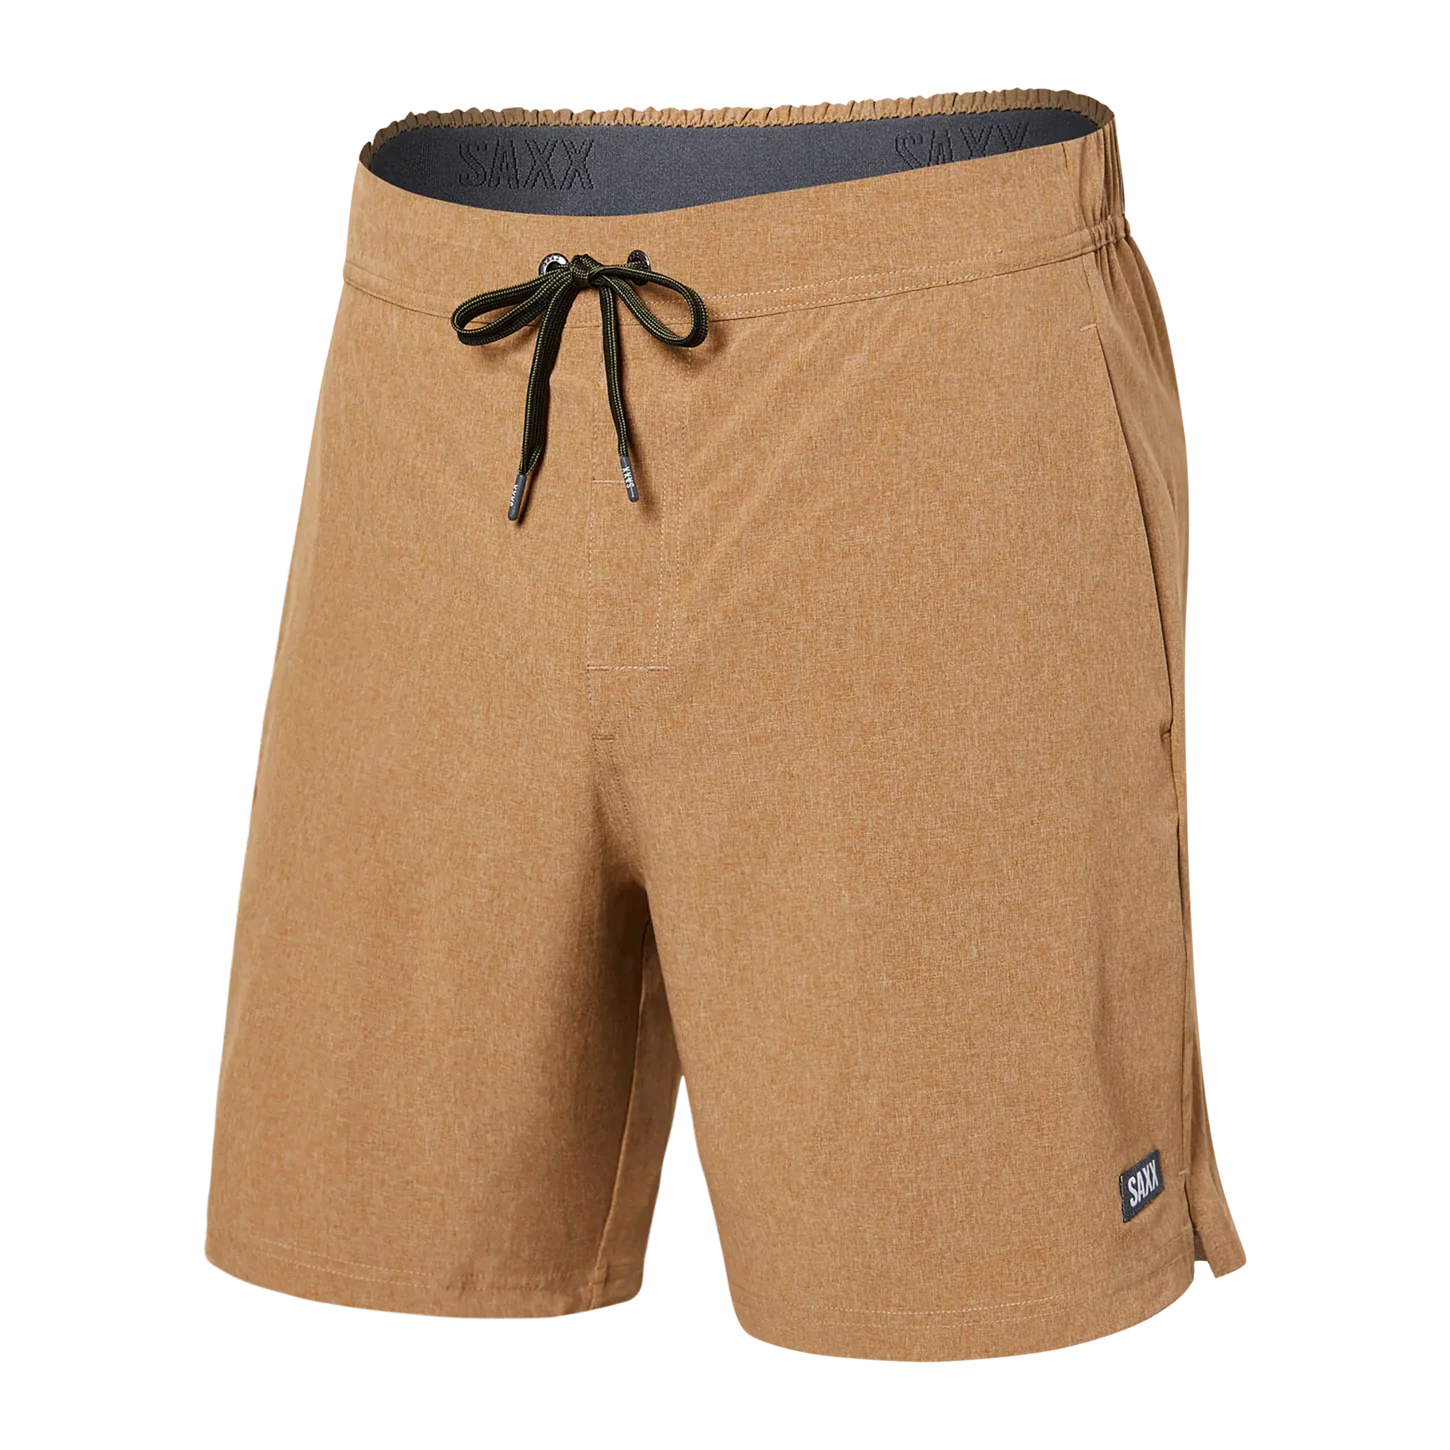 SPORT 2 LIFE 2n1 SHORTS 7" - TOASTED COCONUT HEATHER-Shorts-SAXX-SMALL-TOASTED COCONUT HEAT-Coriander